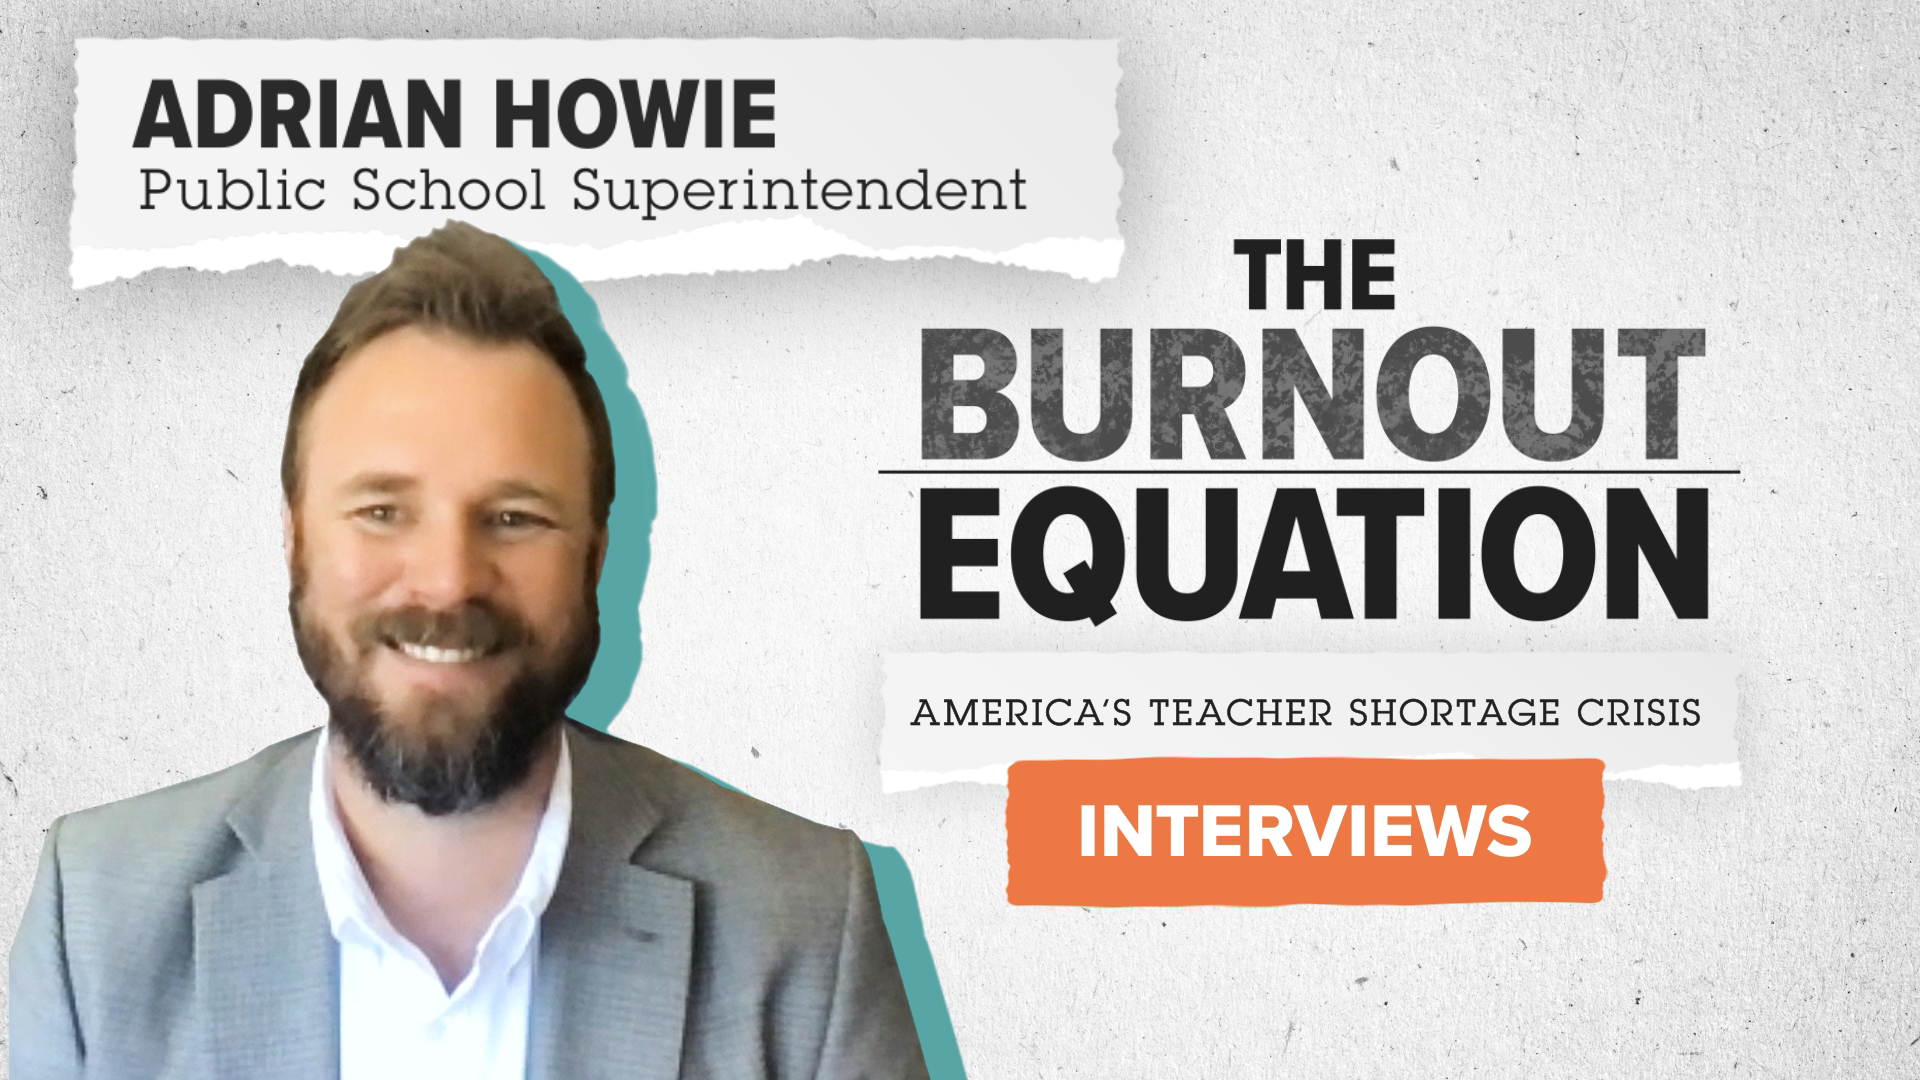 Adrian Howie, superintendent of Hugoton Public Schools in Kansas, talks with VERIFY about how he's combating the teacher shortage crisis in his district.